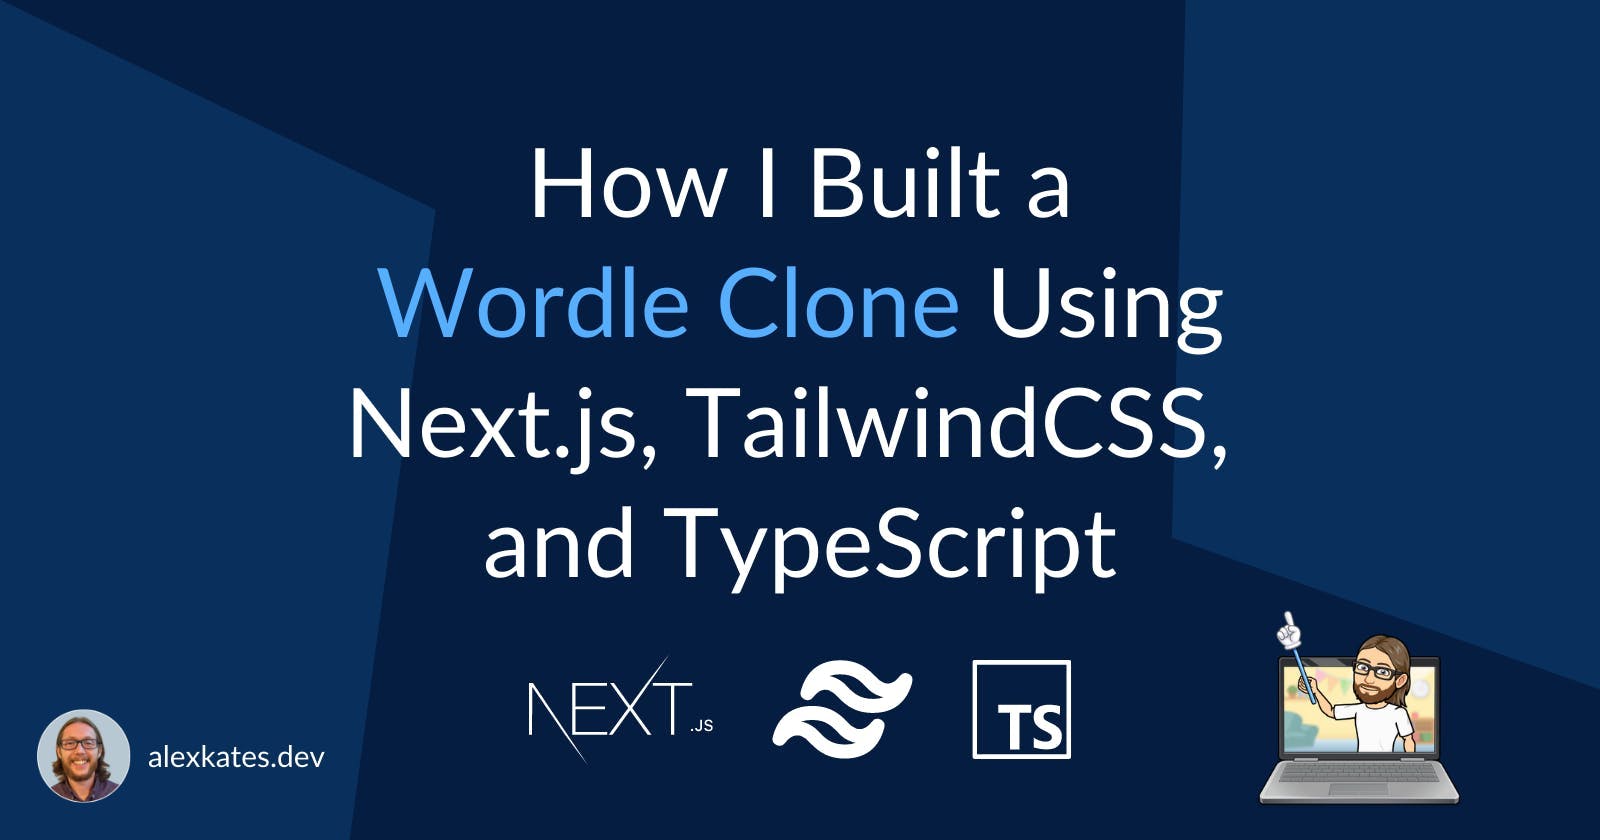 How I Built a Wordle Clone Using Next.js, TailwindCSS, and TypeScript